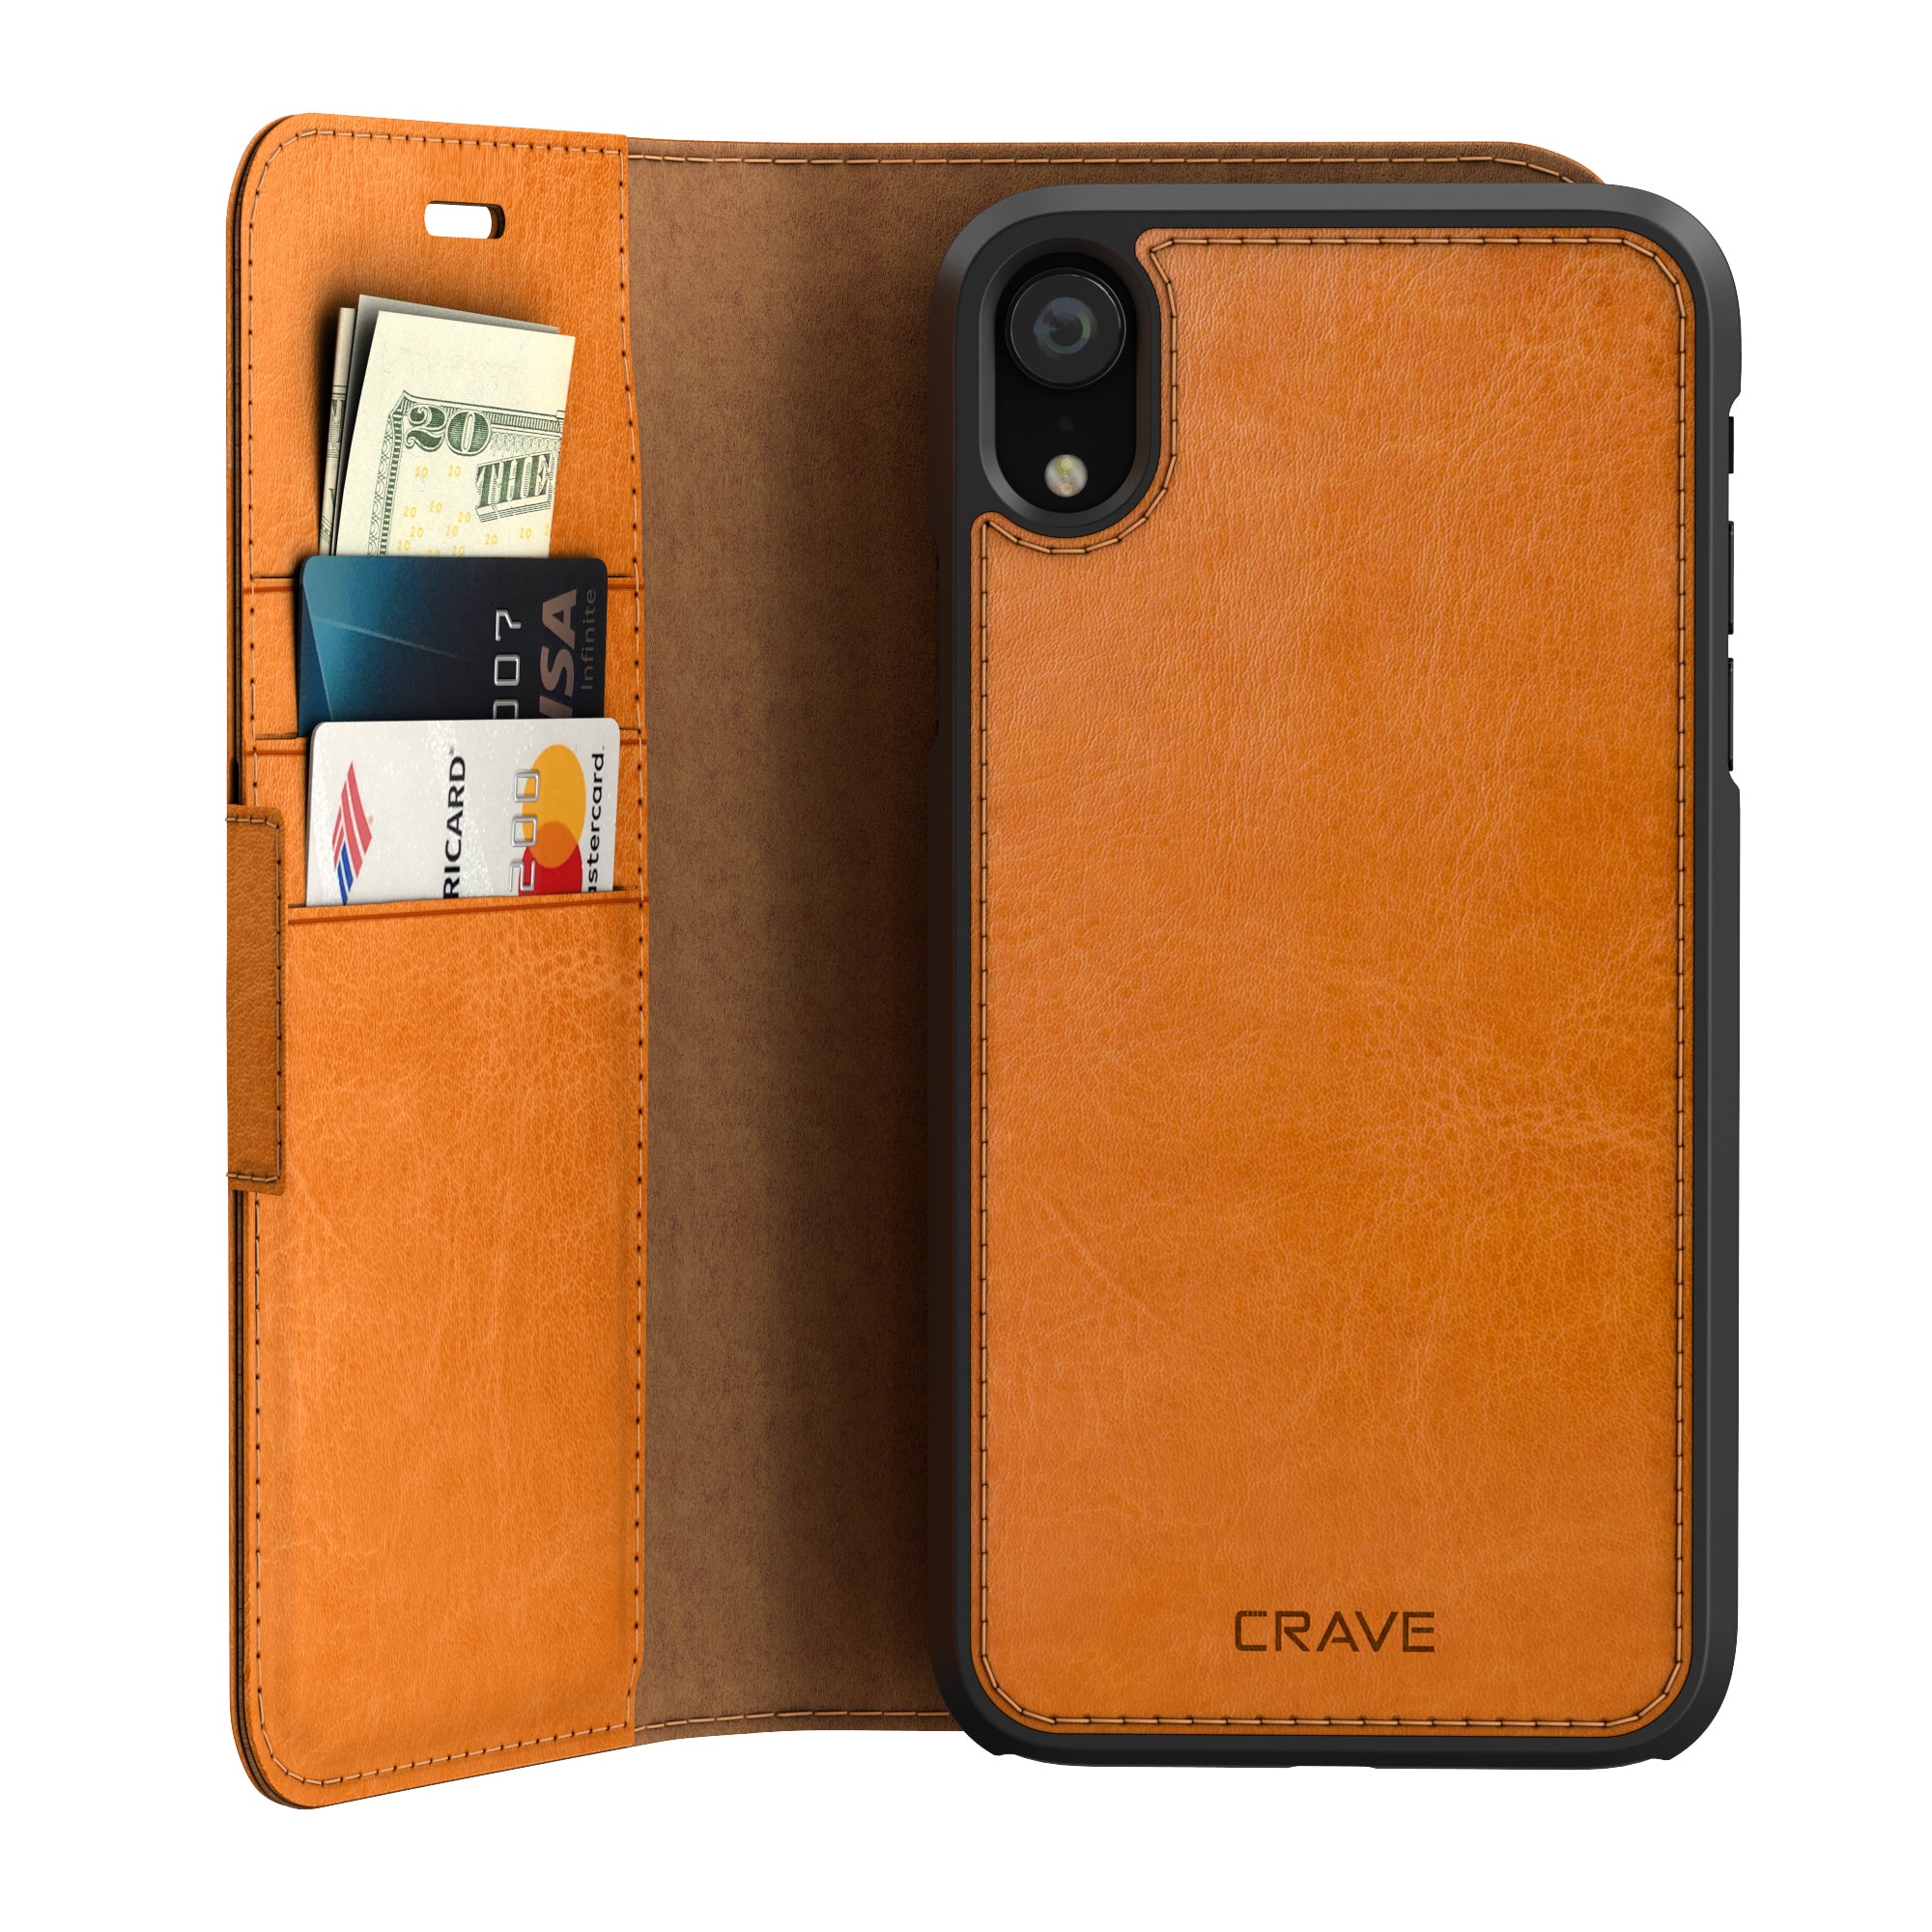 iPhone XR Case Vegan Leather Wallet, Leather Guard